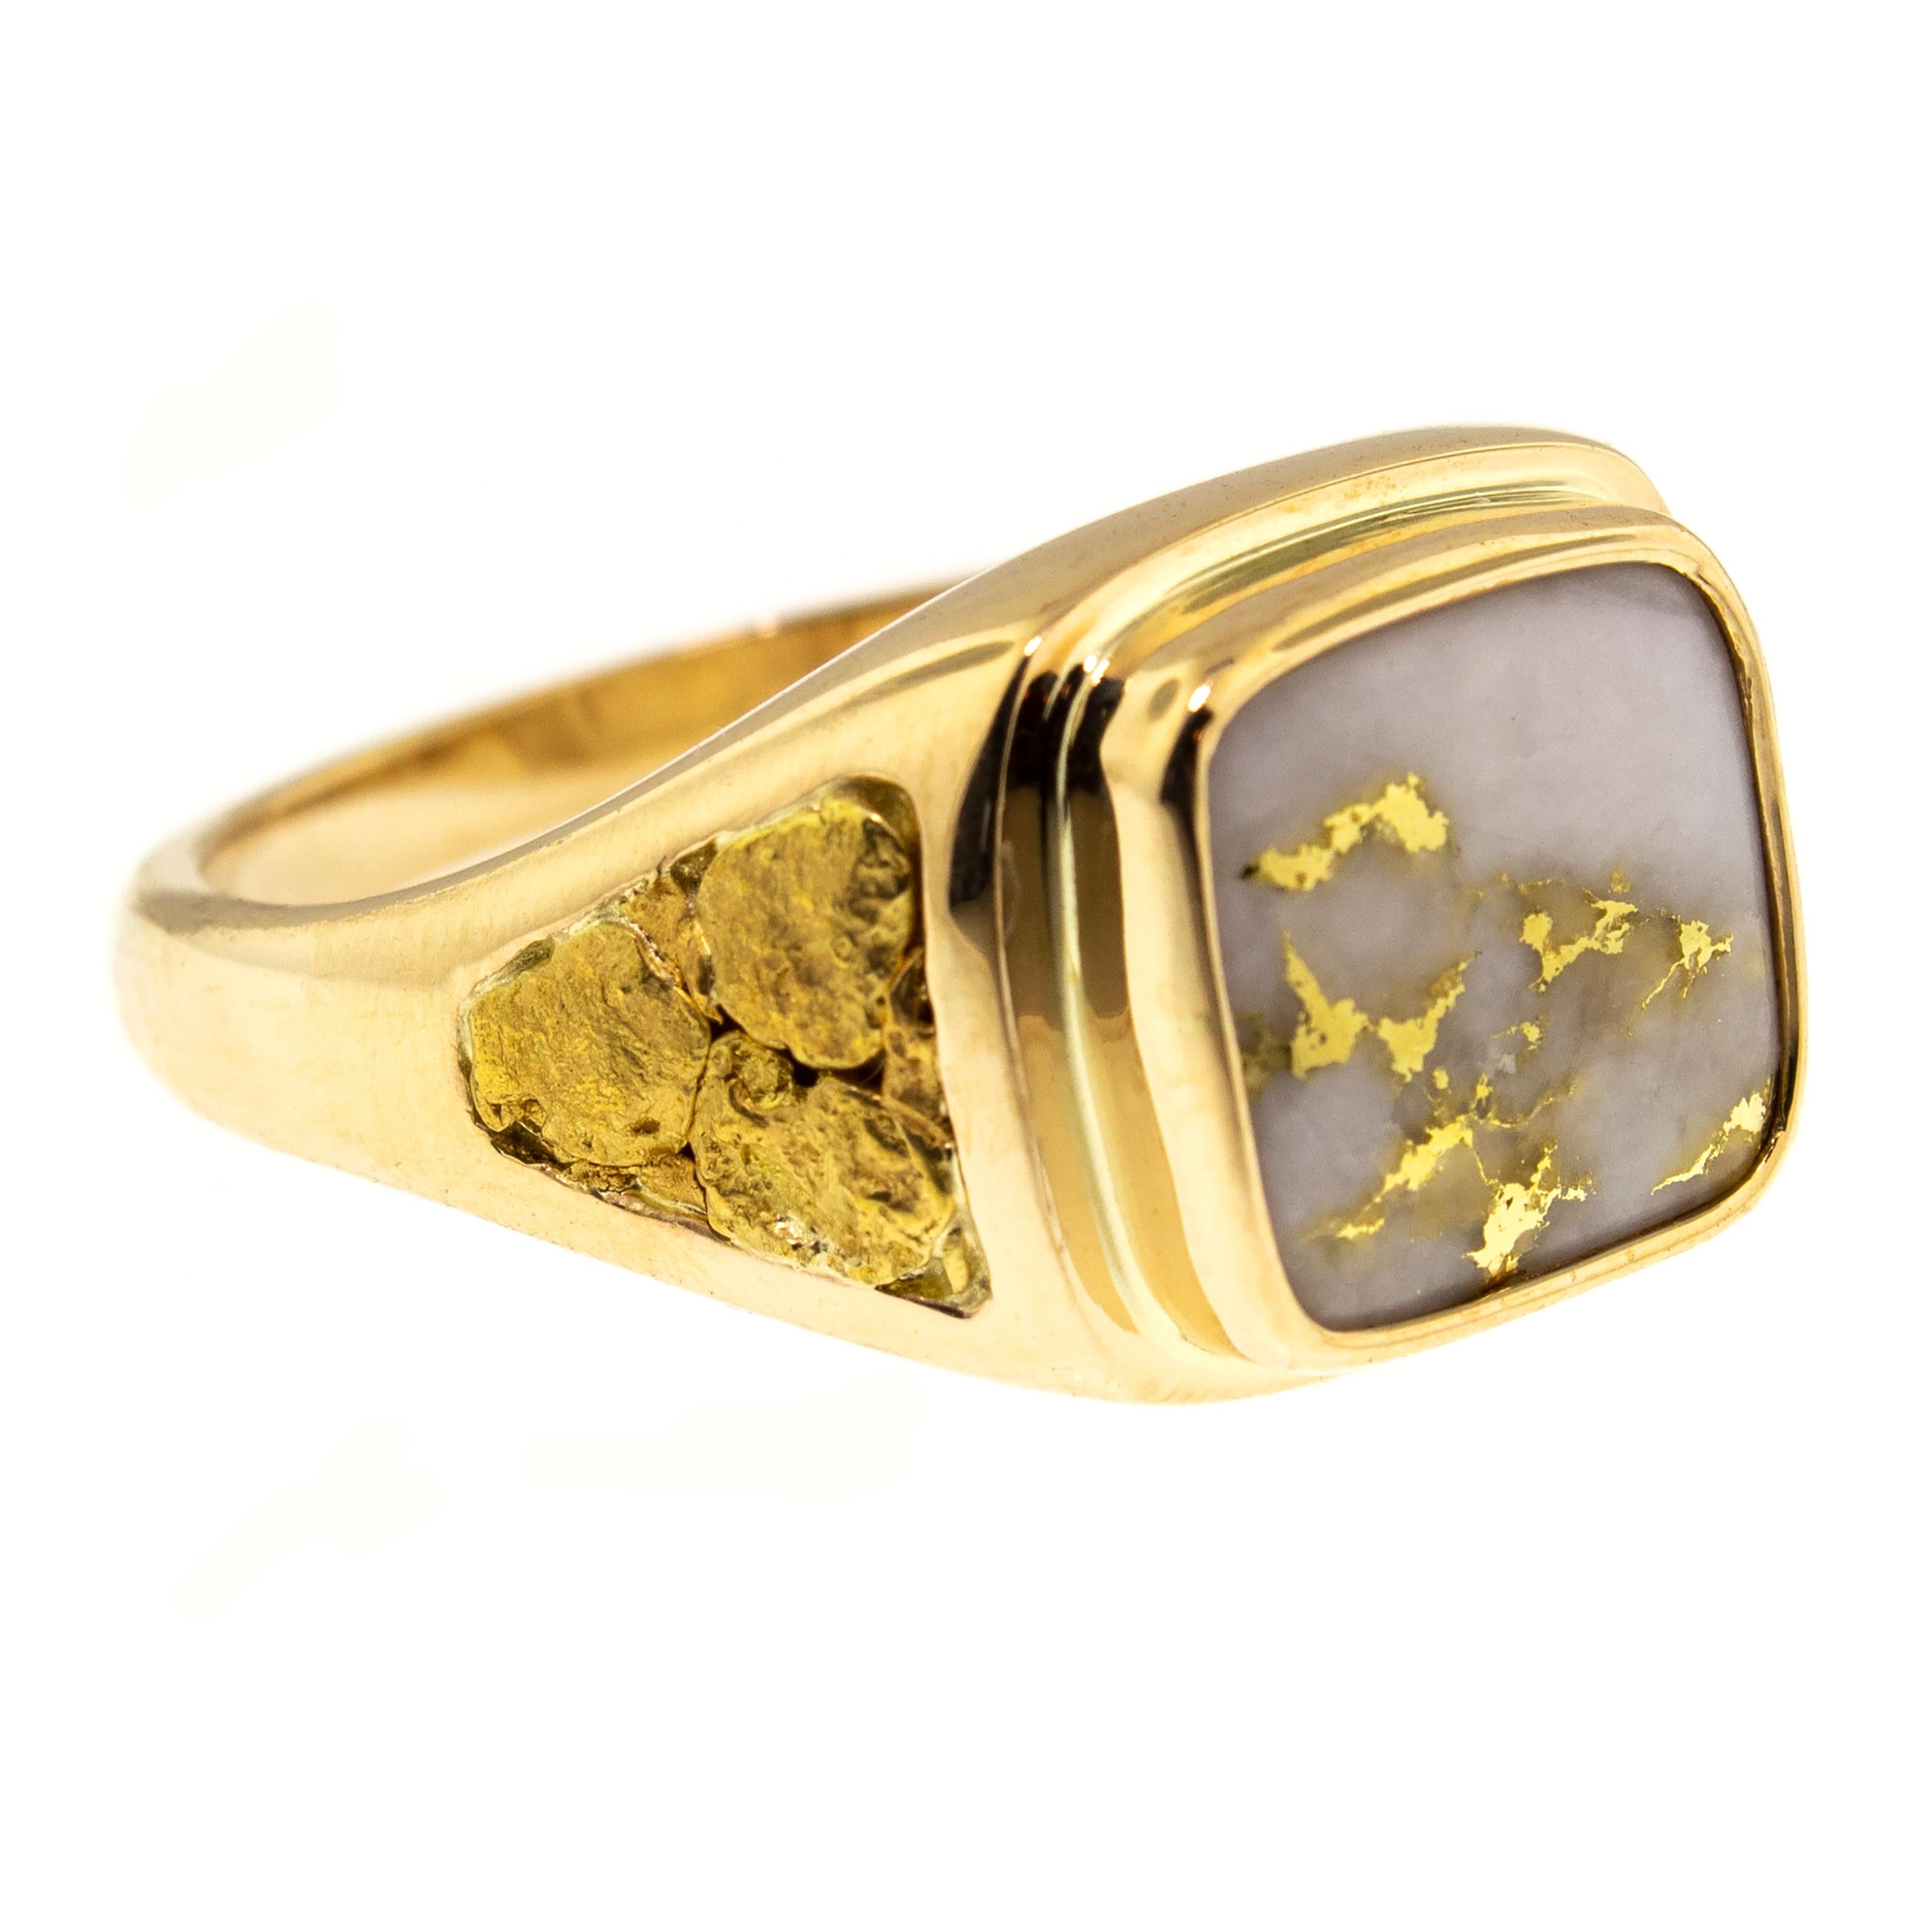 This natural gold bearing quartz and gold nugget men's ring makes a gorgeous statement in an elegant and masculine manner. The classic shape and styling are a perfect frame for the natural material choices, and the color of the two types of natural